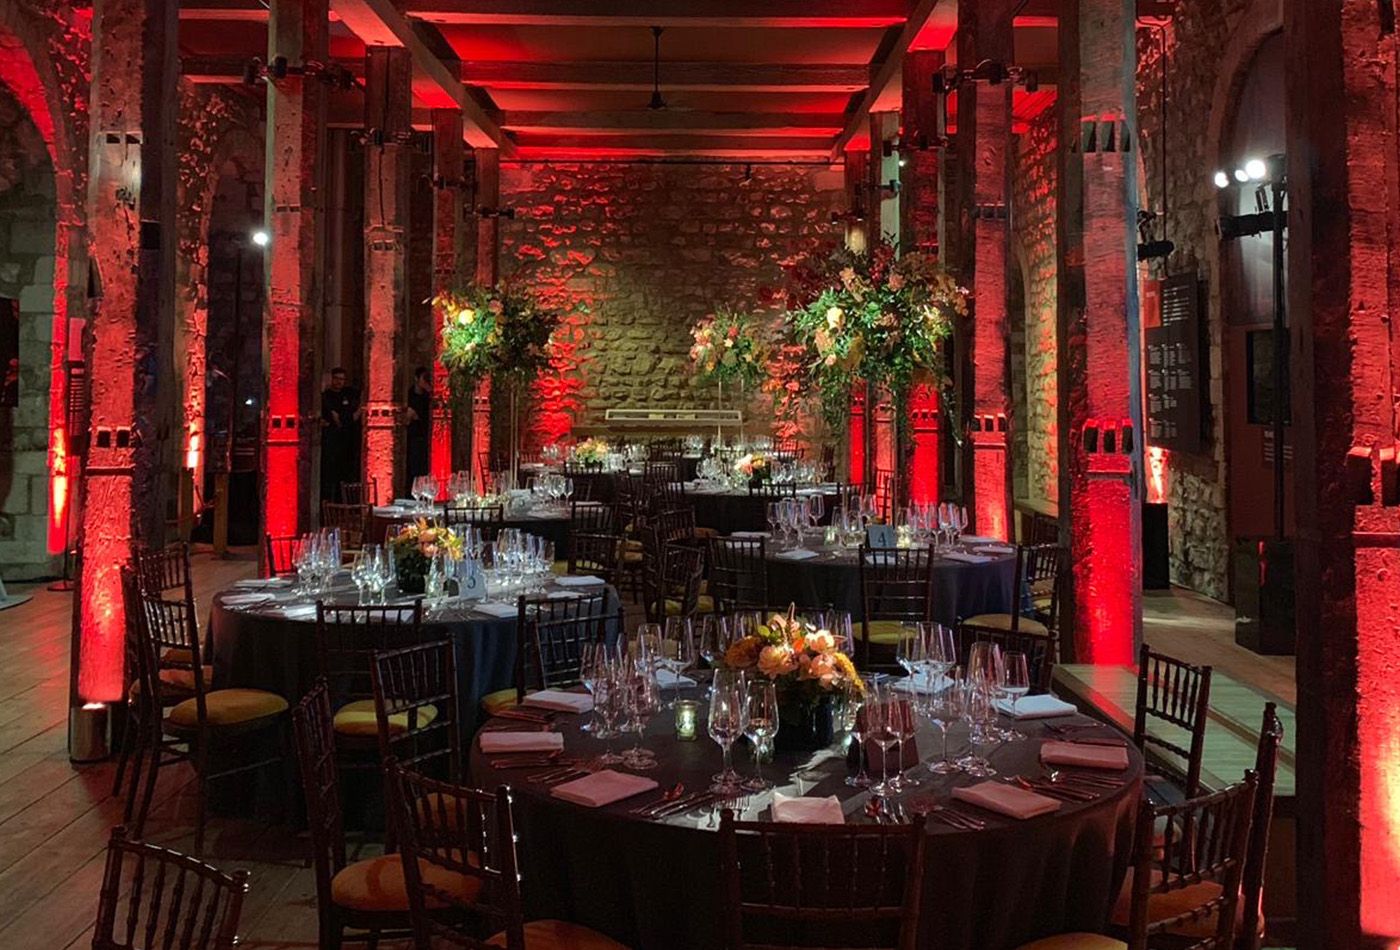 Black themed dinner party with stone walls lit up in red